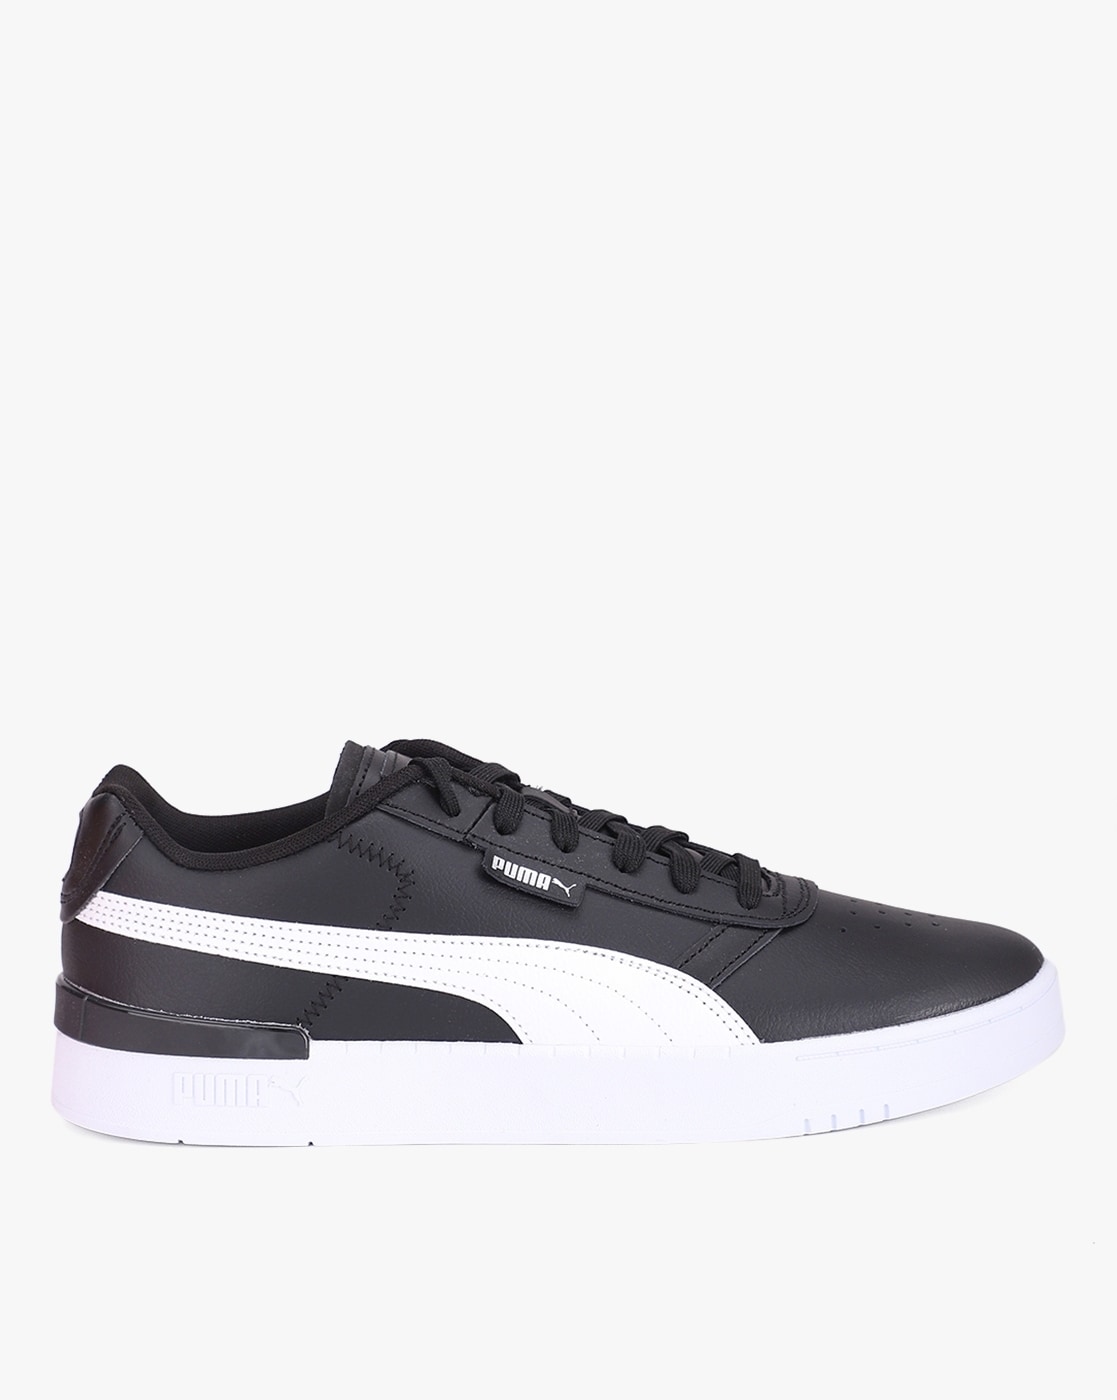 Puma Unisex Perforations Slipstream lth Leather Sneakers Price in India,  Full Specifications & Offers | DTashion.com